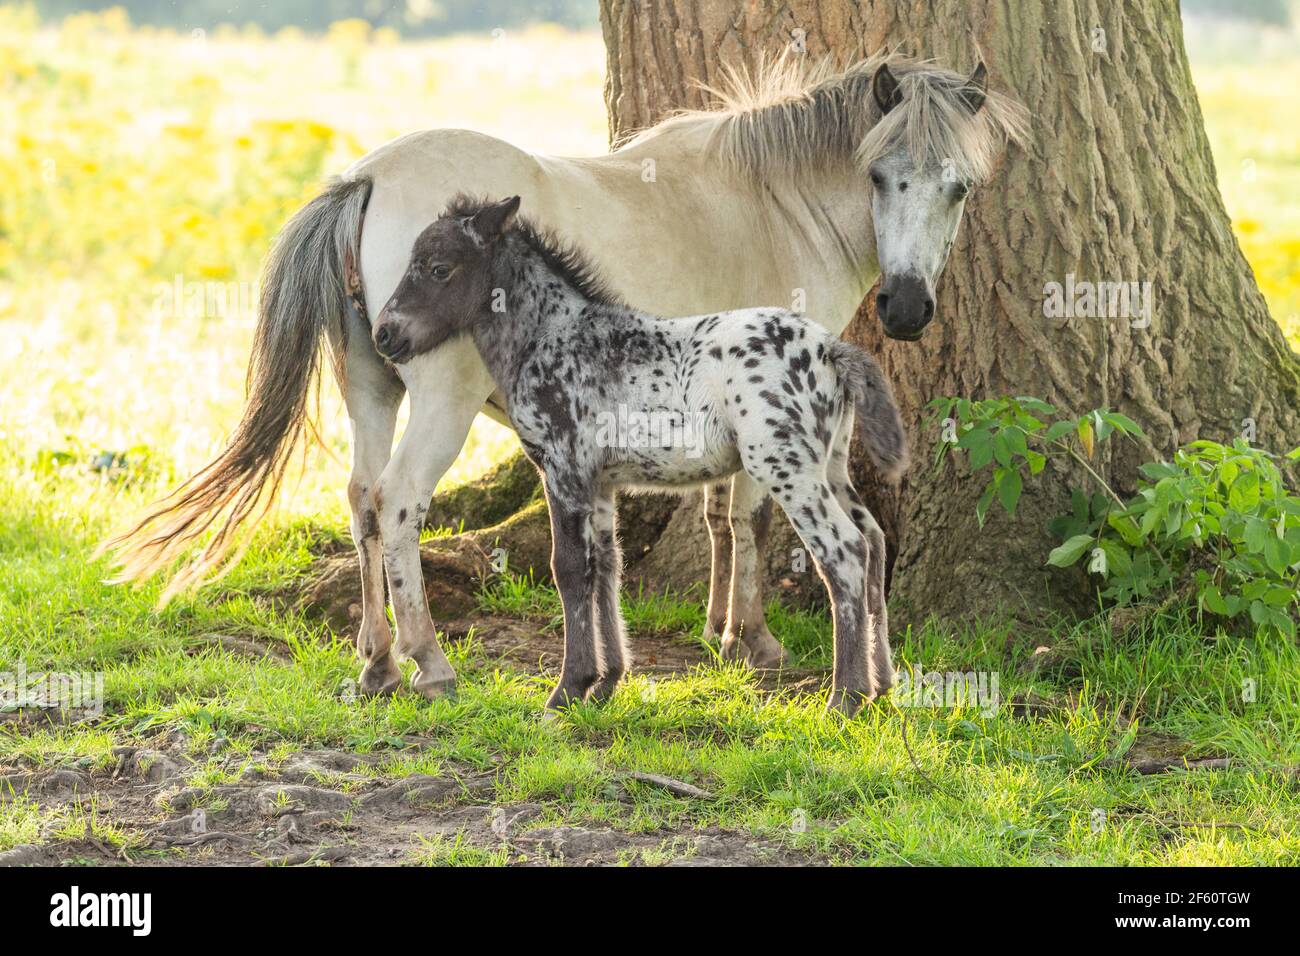 A mare with a foal. Stock Photo